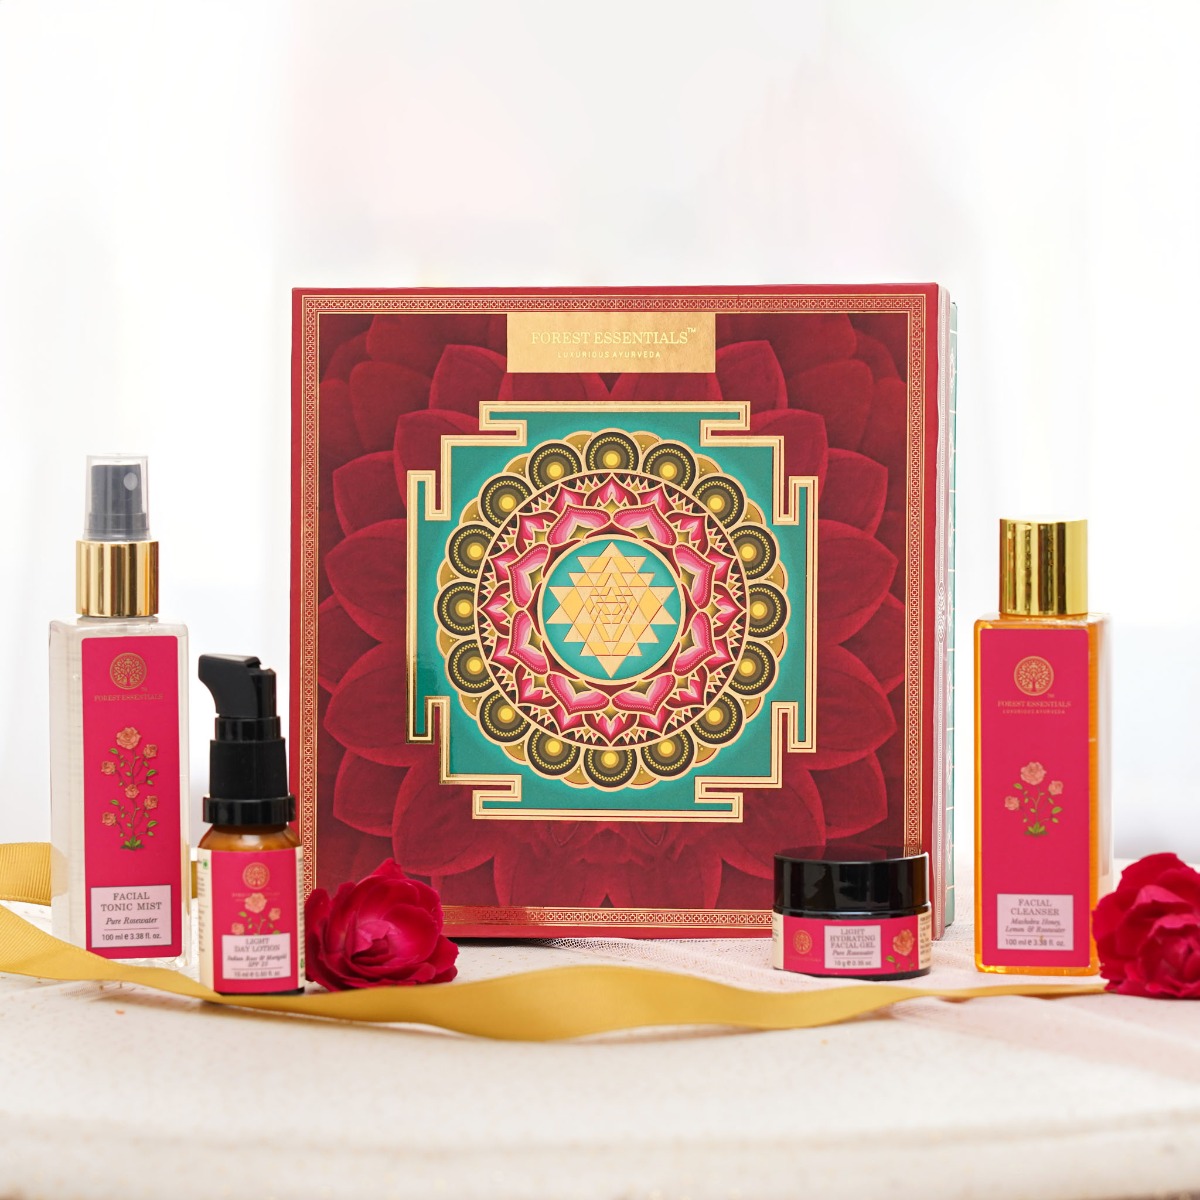 Forest Essentials - In Store #Diwali #Exclusive: Enjoy limited-edition  #GiftBoxes curated with our #Bestsellers, on Diwali purchases at your  nearest #ForestEssentials store, as a gift from us to you. Indulge in a